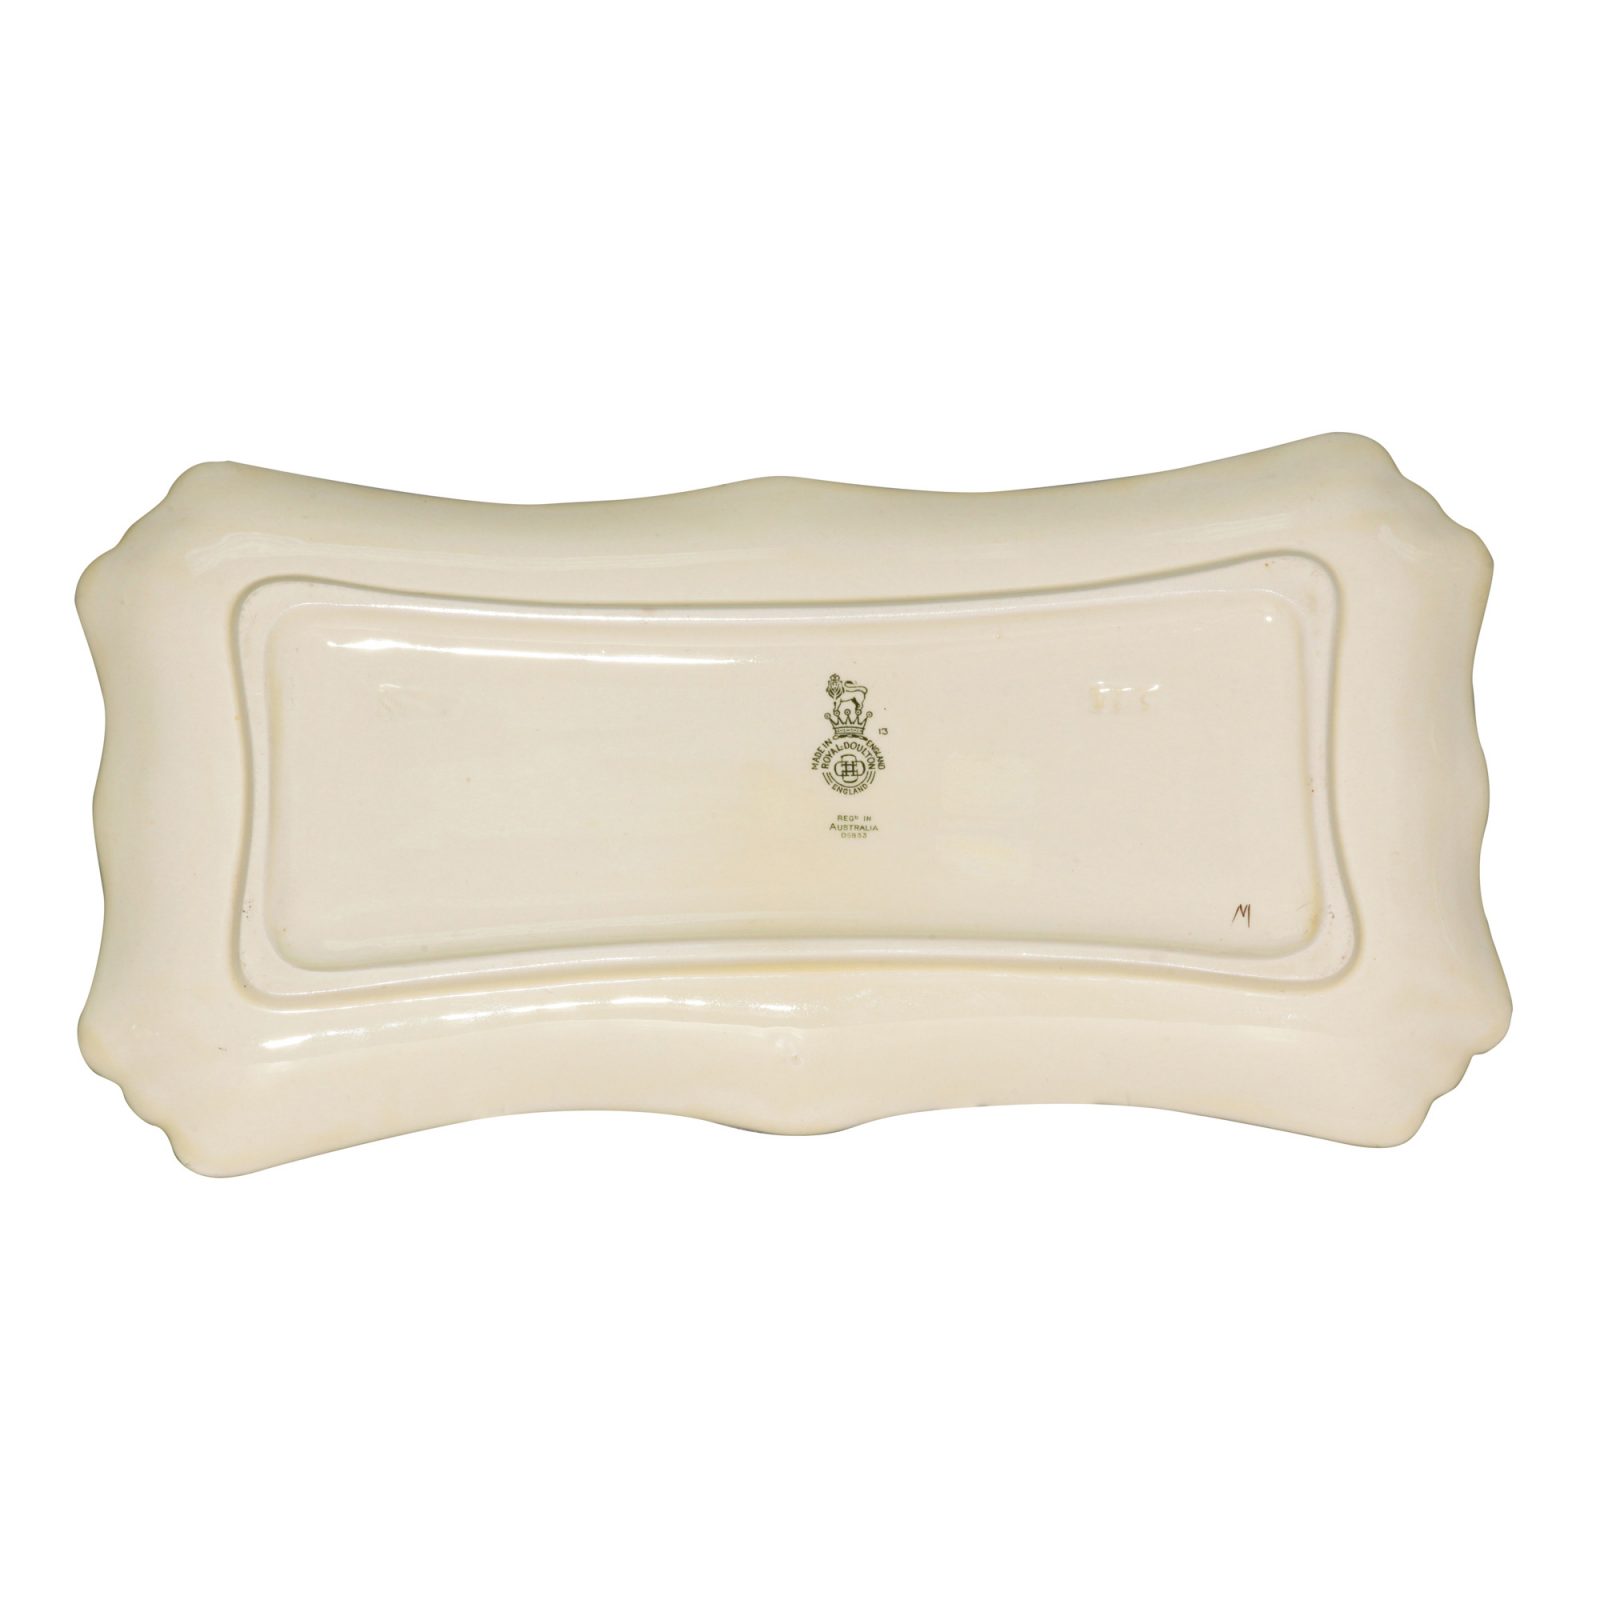 Dickens Toots Cuttle Tray - Royal Doulton Seriesware